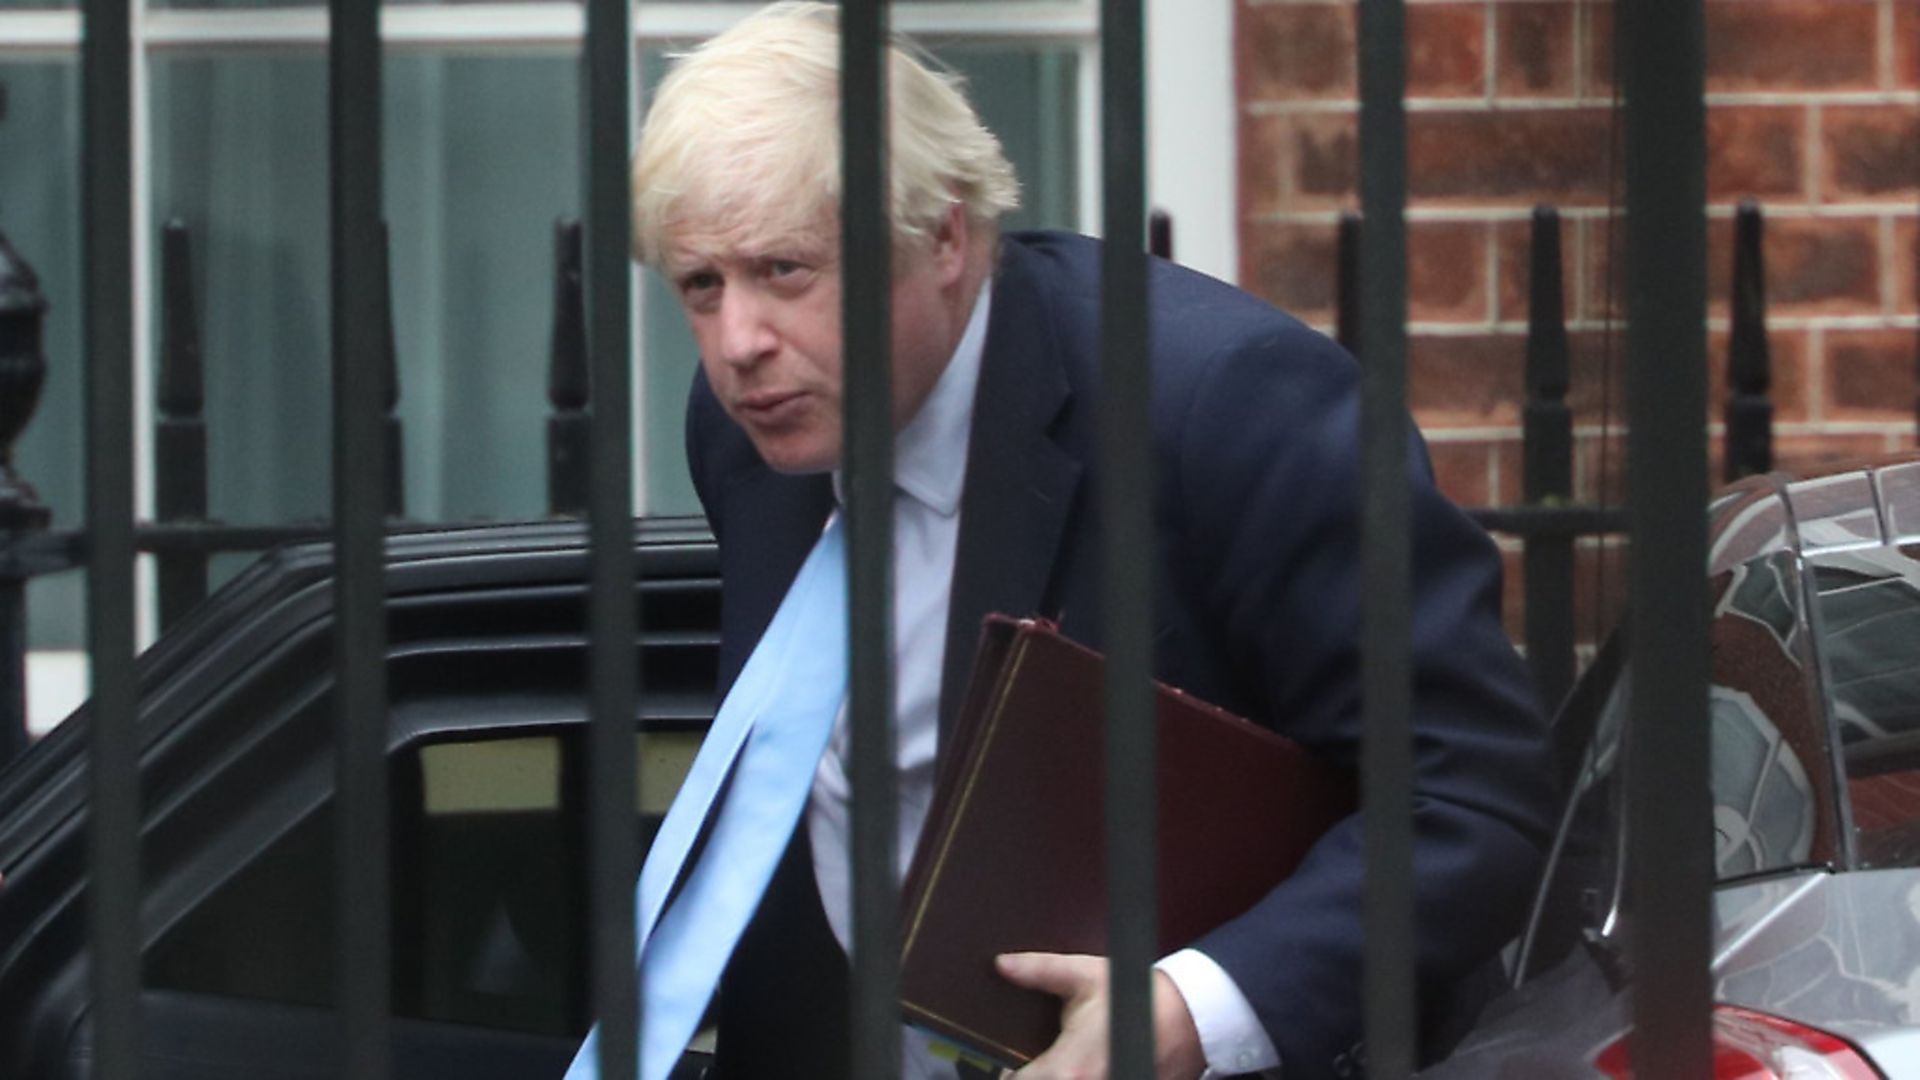 Prime Minister Boris Johnson arrives in Downing Street, London. Photograph: Yui Mok/PA. - Credit: PA Wire/PA Images